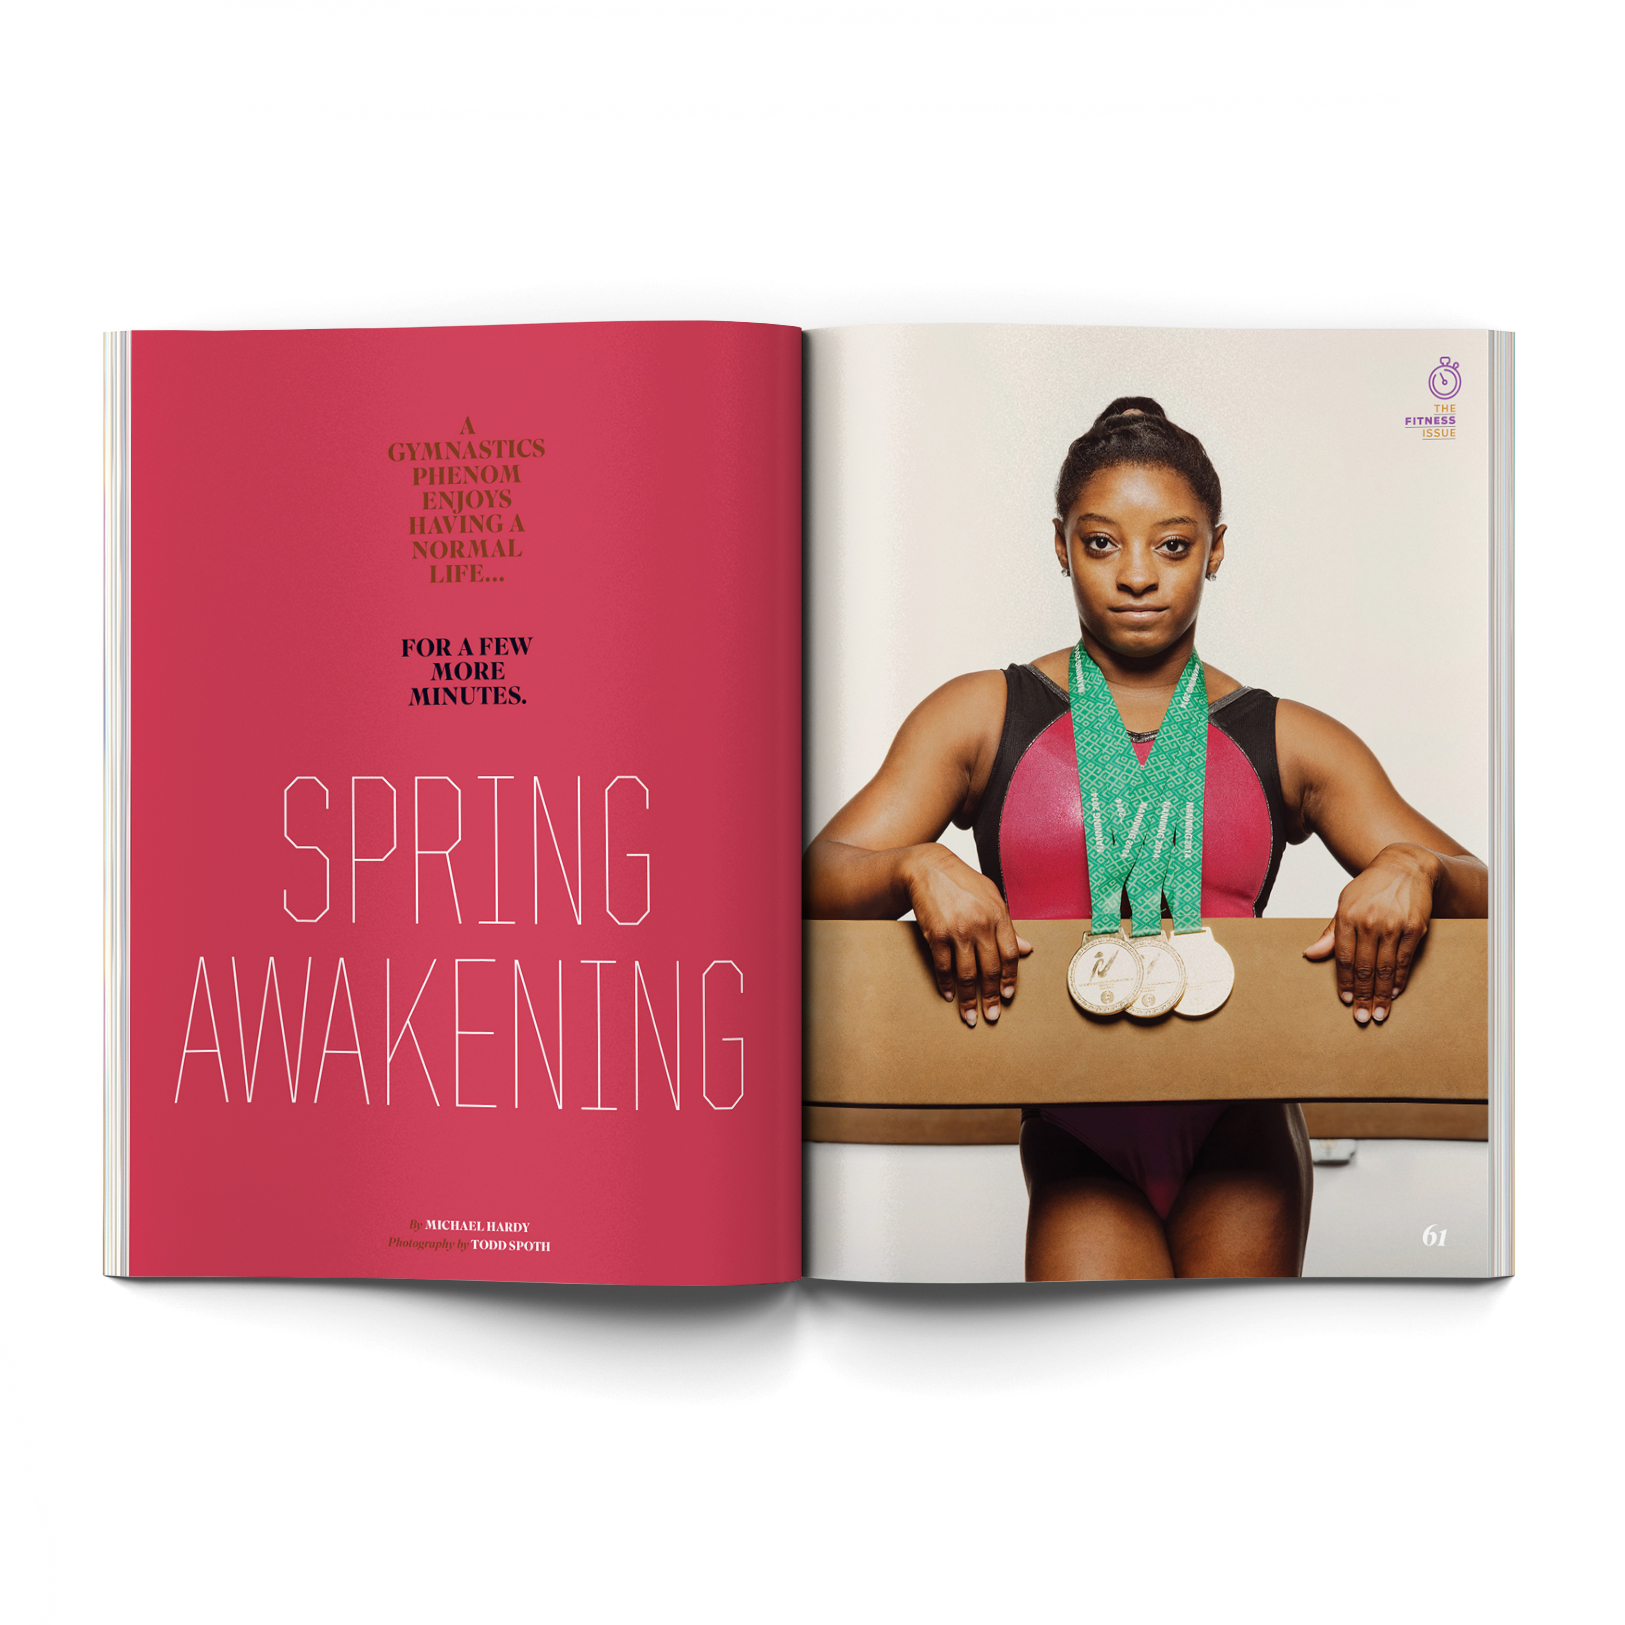 Simone Biles, US gold-medal winning olympic gymnast, photographed by editorial and commercial photographer, Todd Spoth, for a cover feature in Houstonia Magazine.